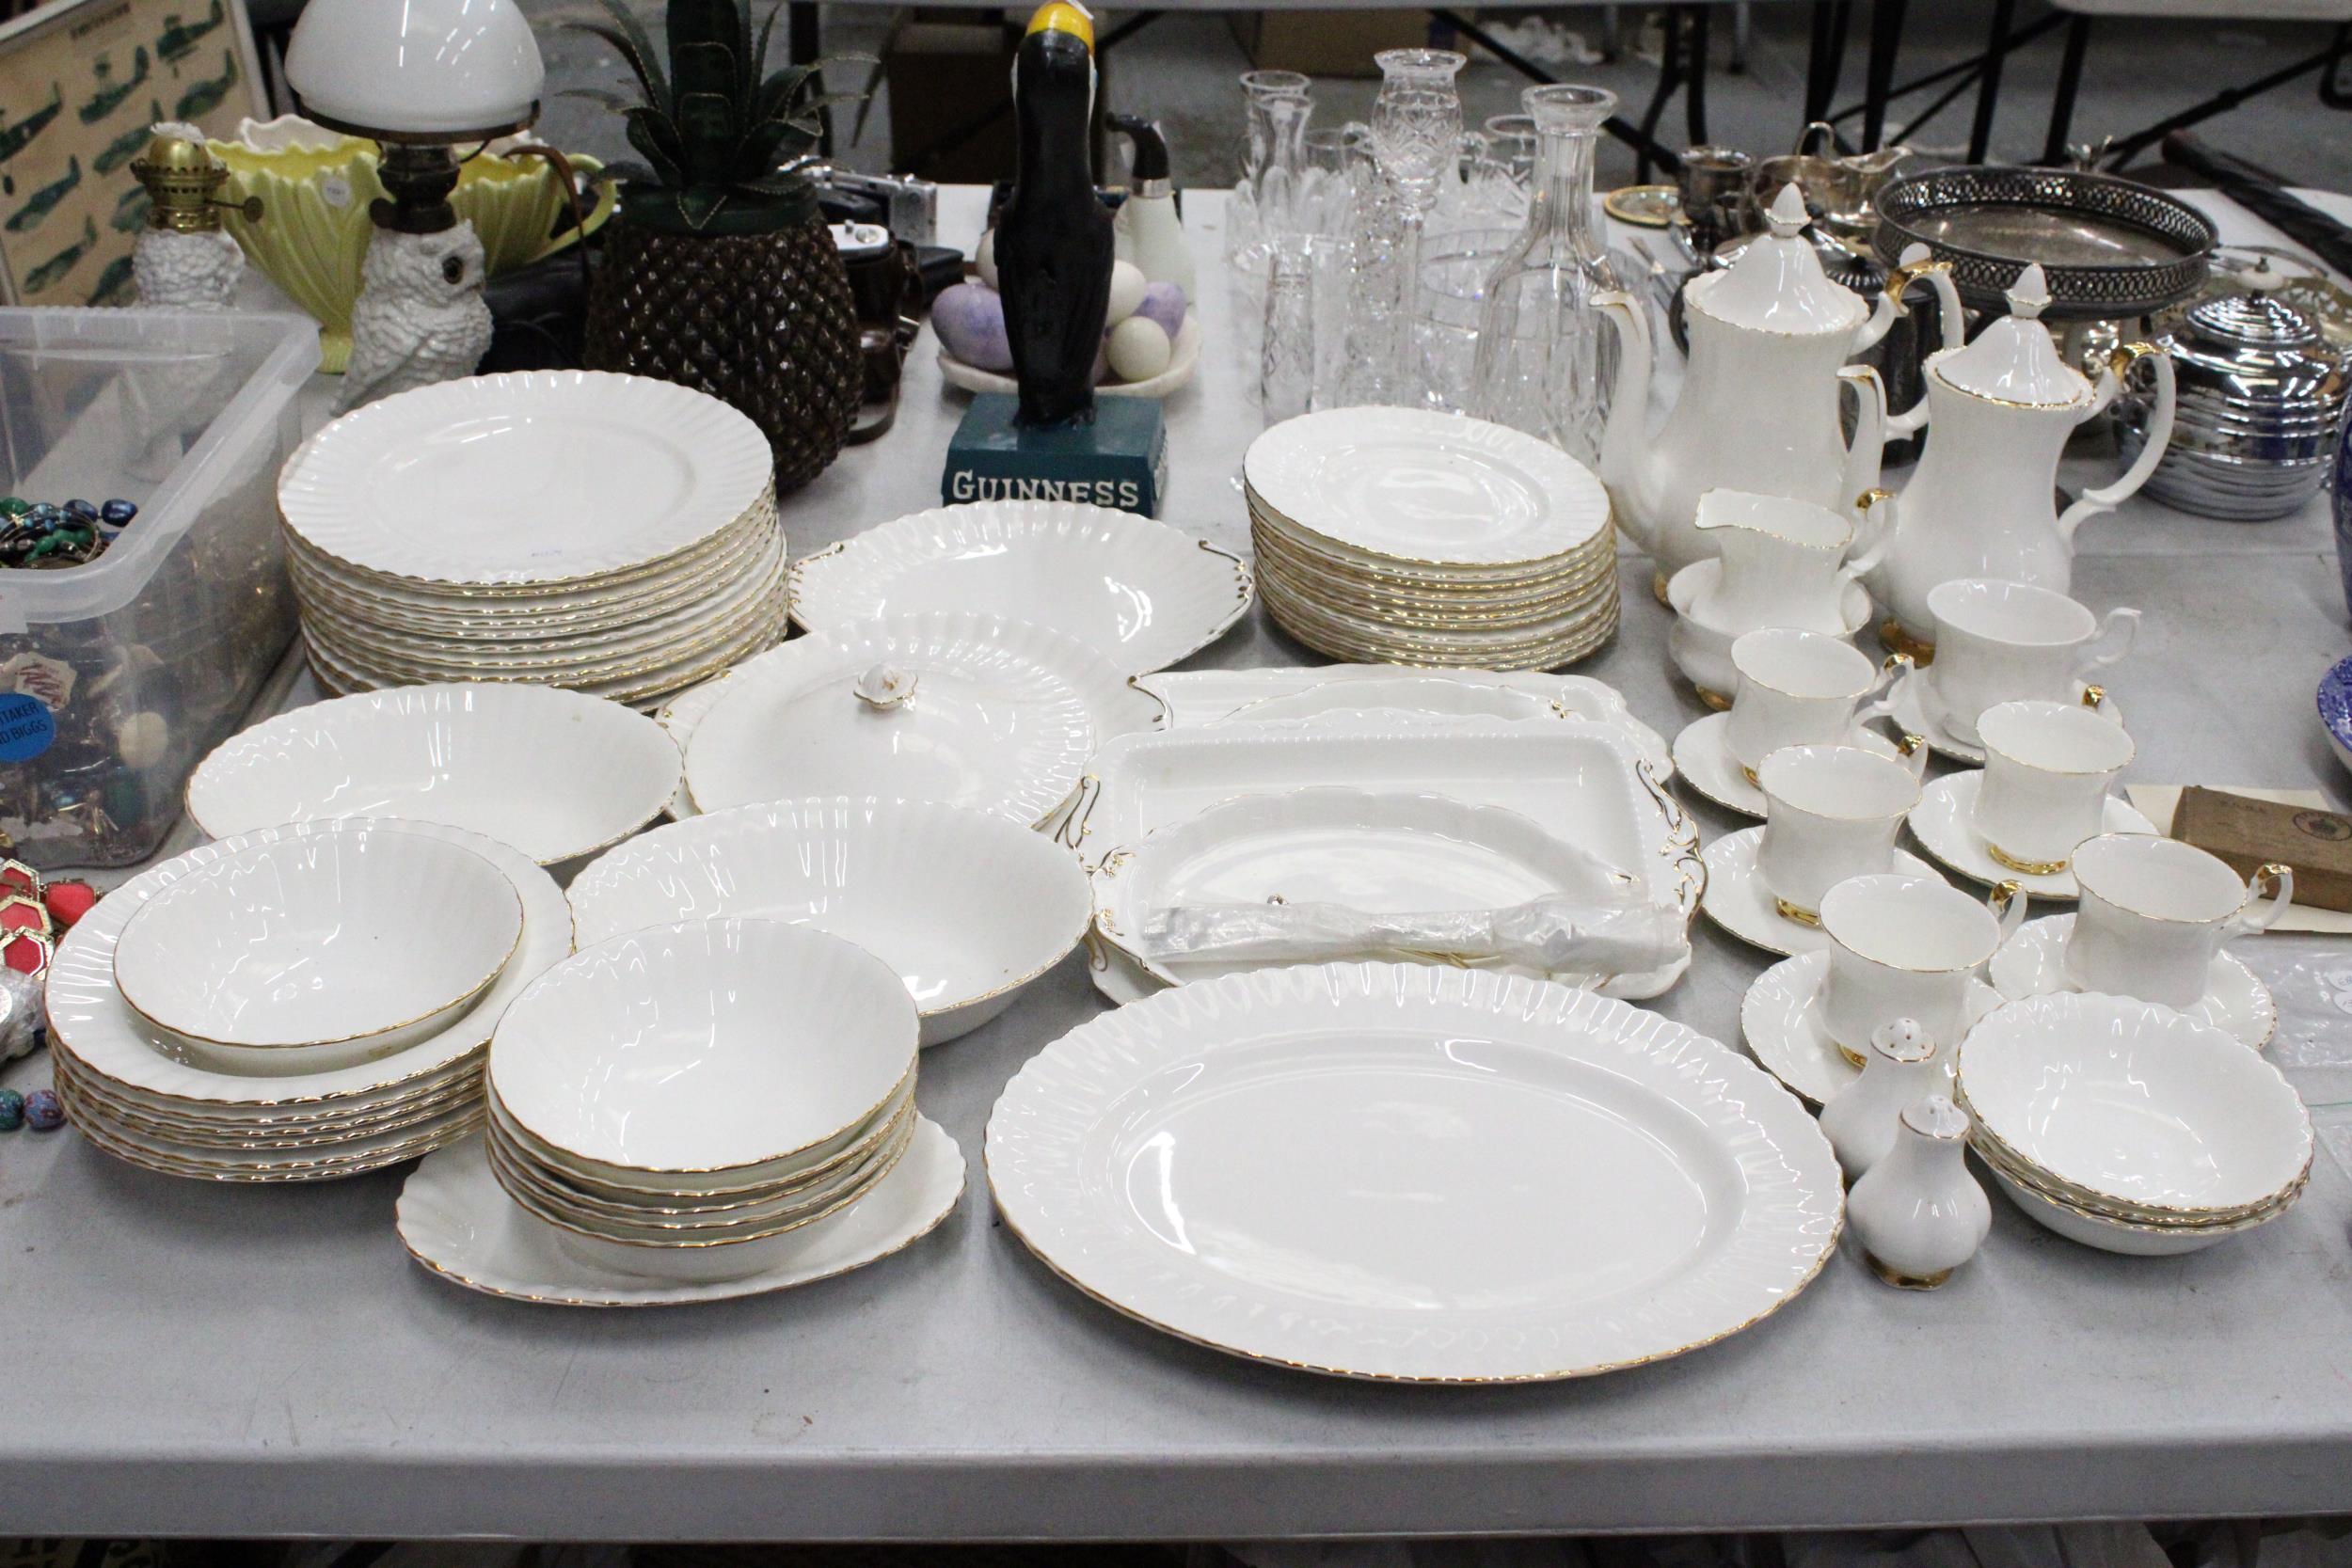 A LARGE ROYAL ALBERT PART DINNER SERVIE "VAL DOR" TO INCLUDE PLATES, CUPS, SAUCERS, TEAPOT, COFFEE